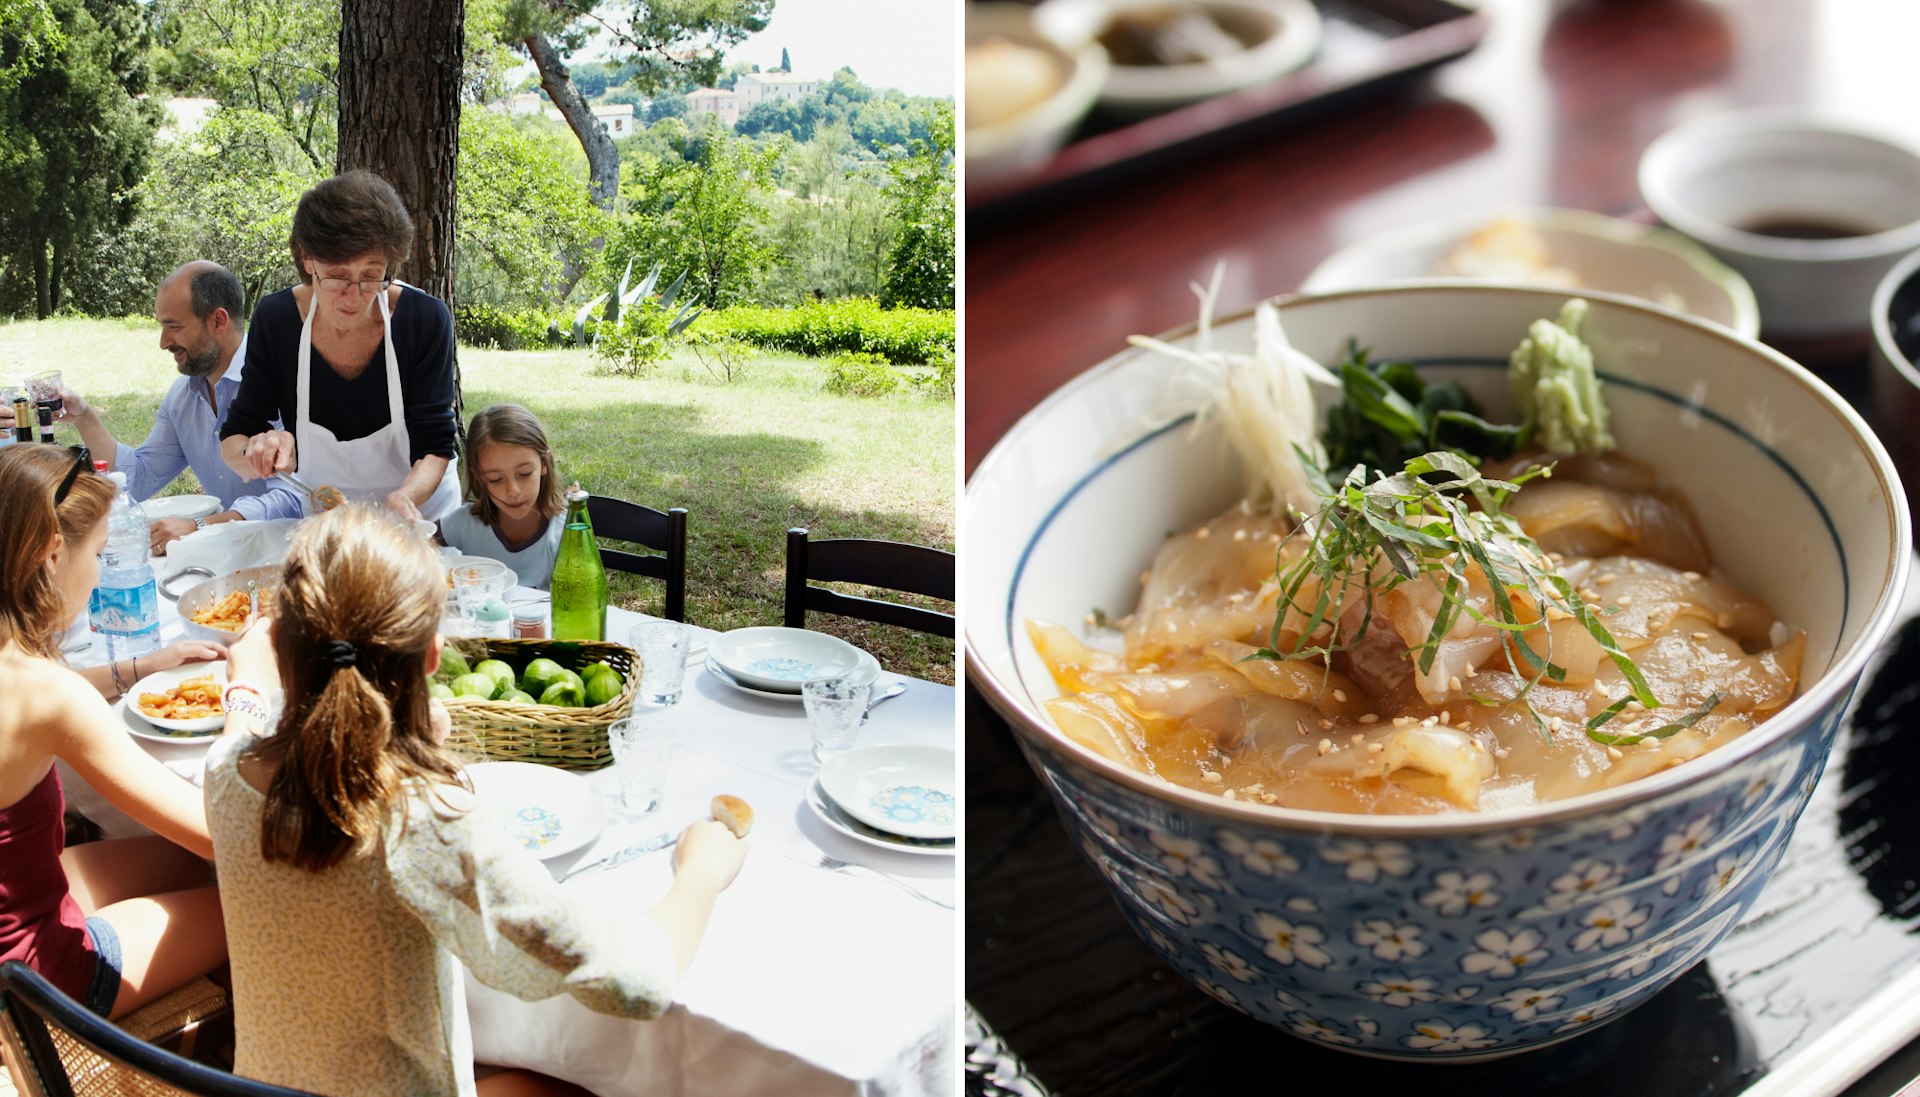 A family eats at a table in Italy; a bowl of soup in Tohoku.